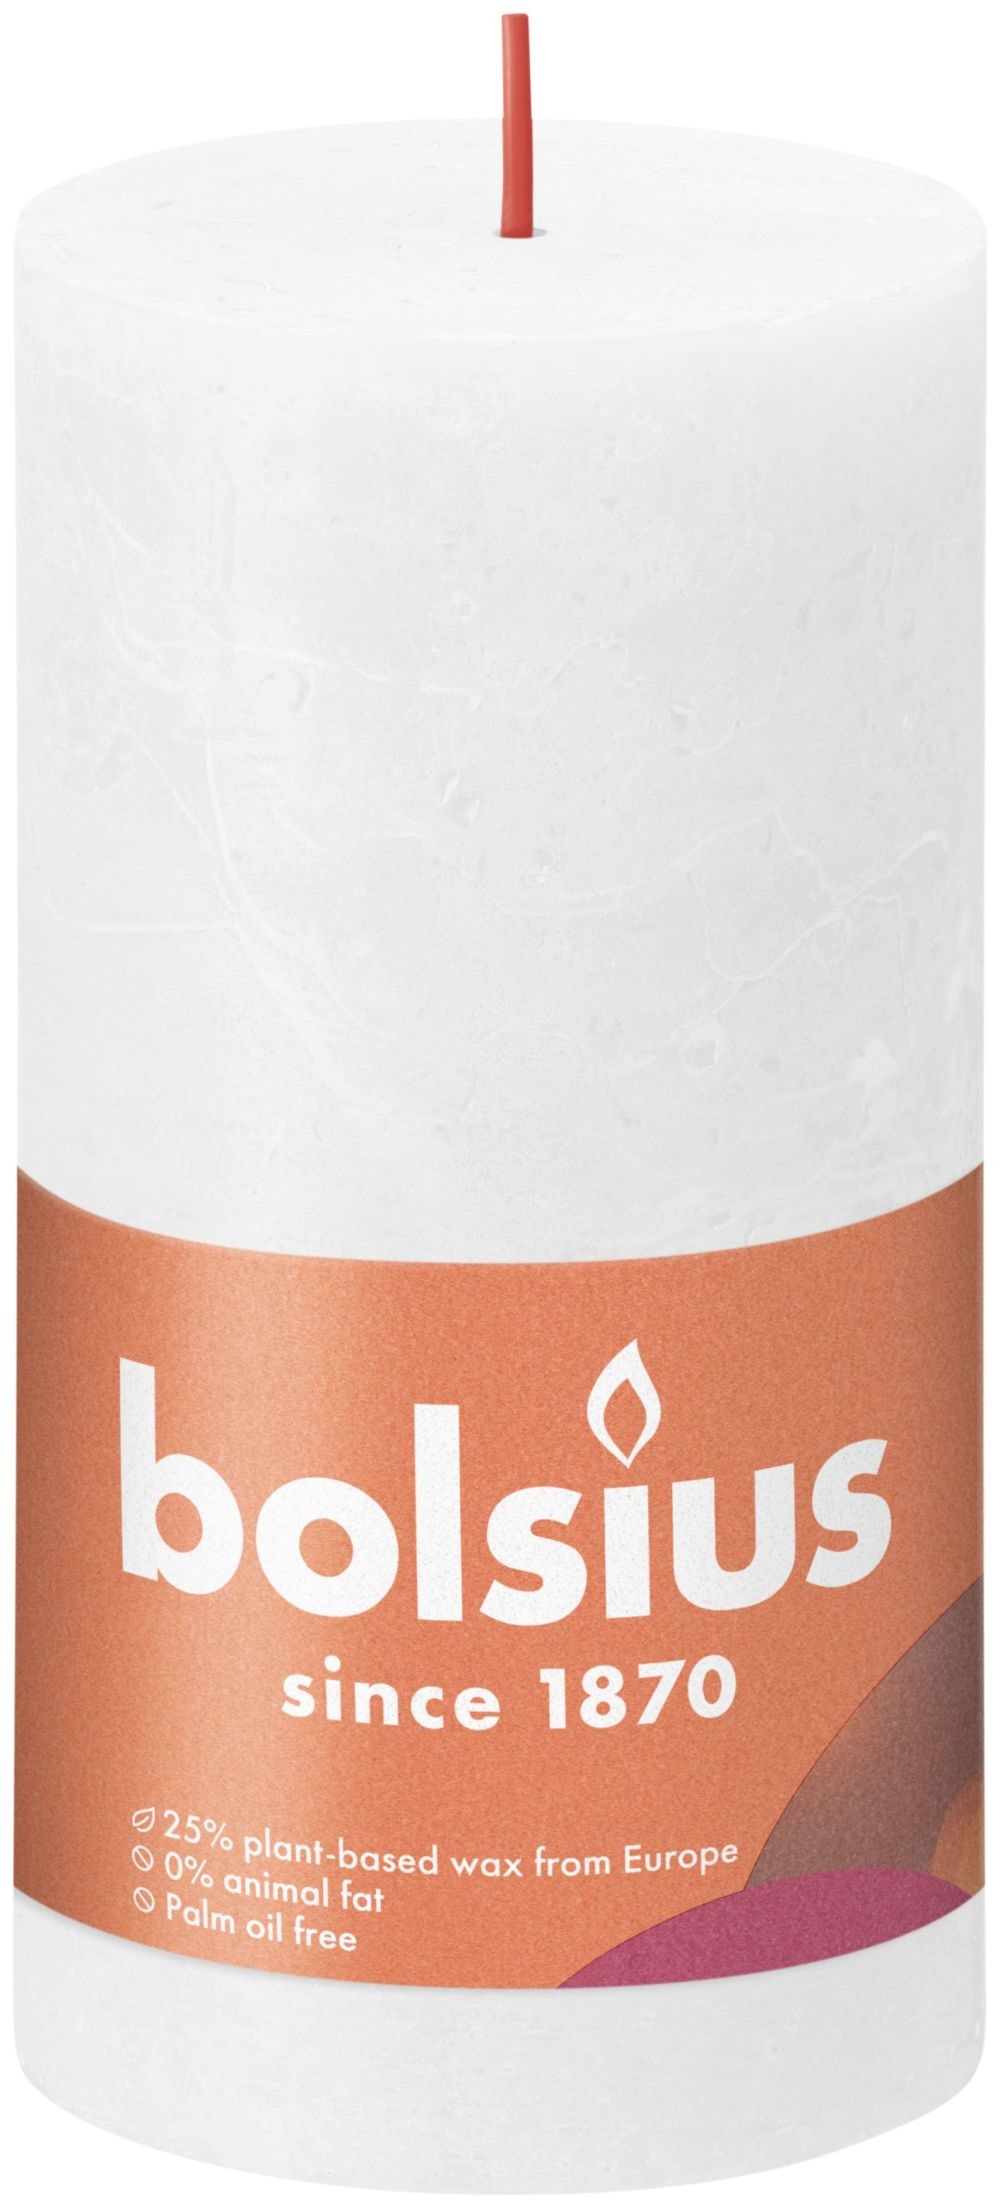 Bolsius Shine Collection Rustiek Stompkaars 130/68 Cloudy White- Wolkenwit